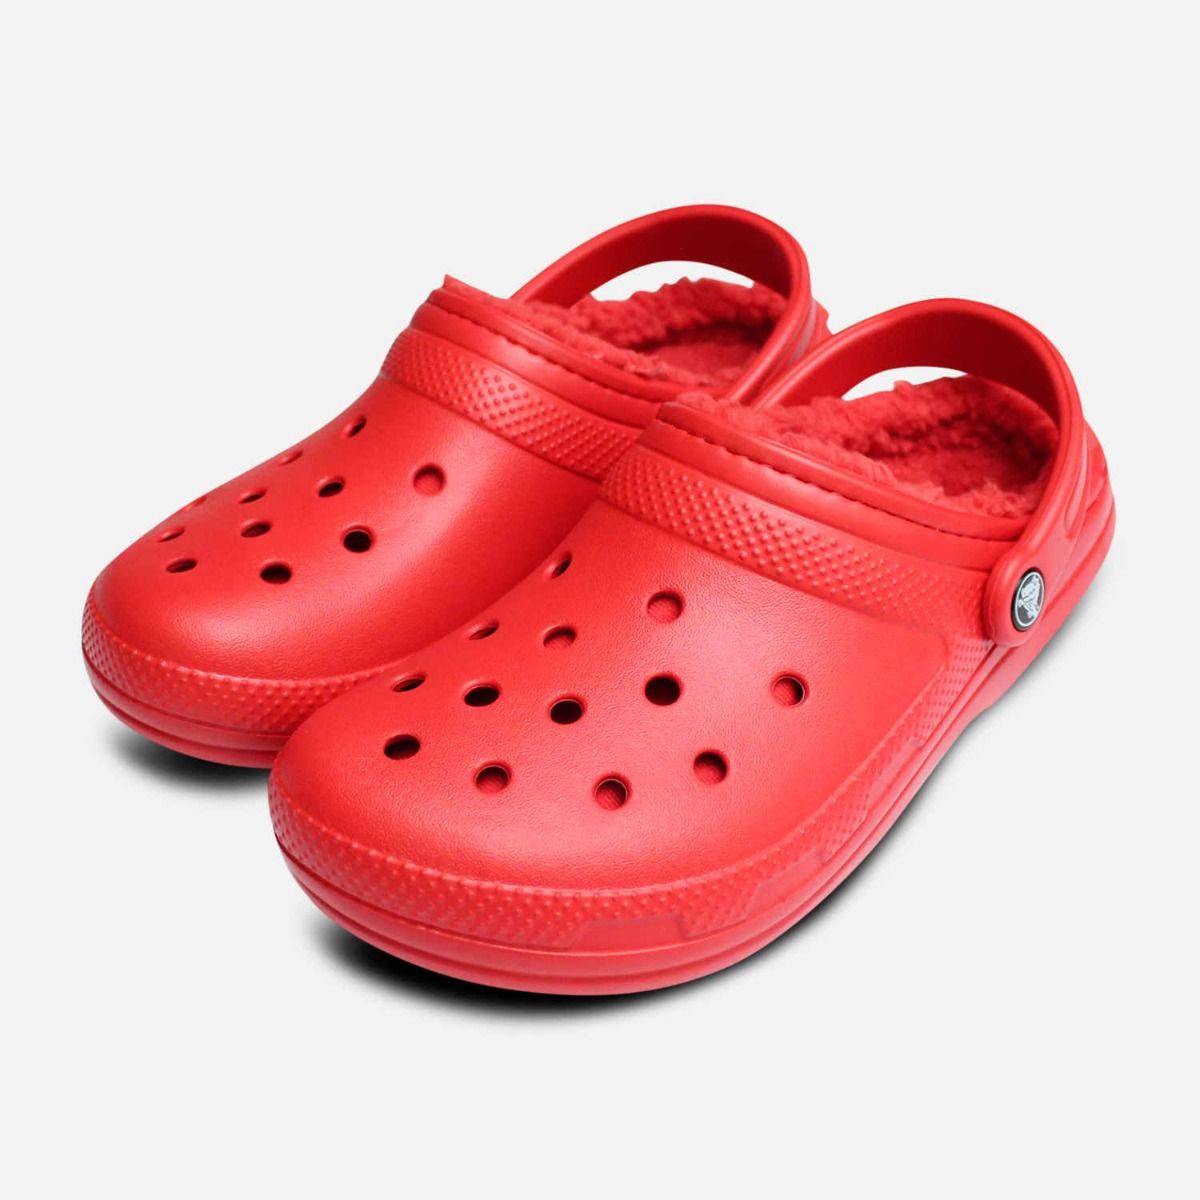 red crocs with fur Online shopping has 